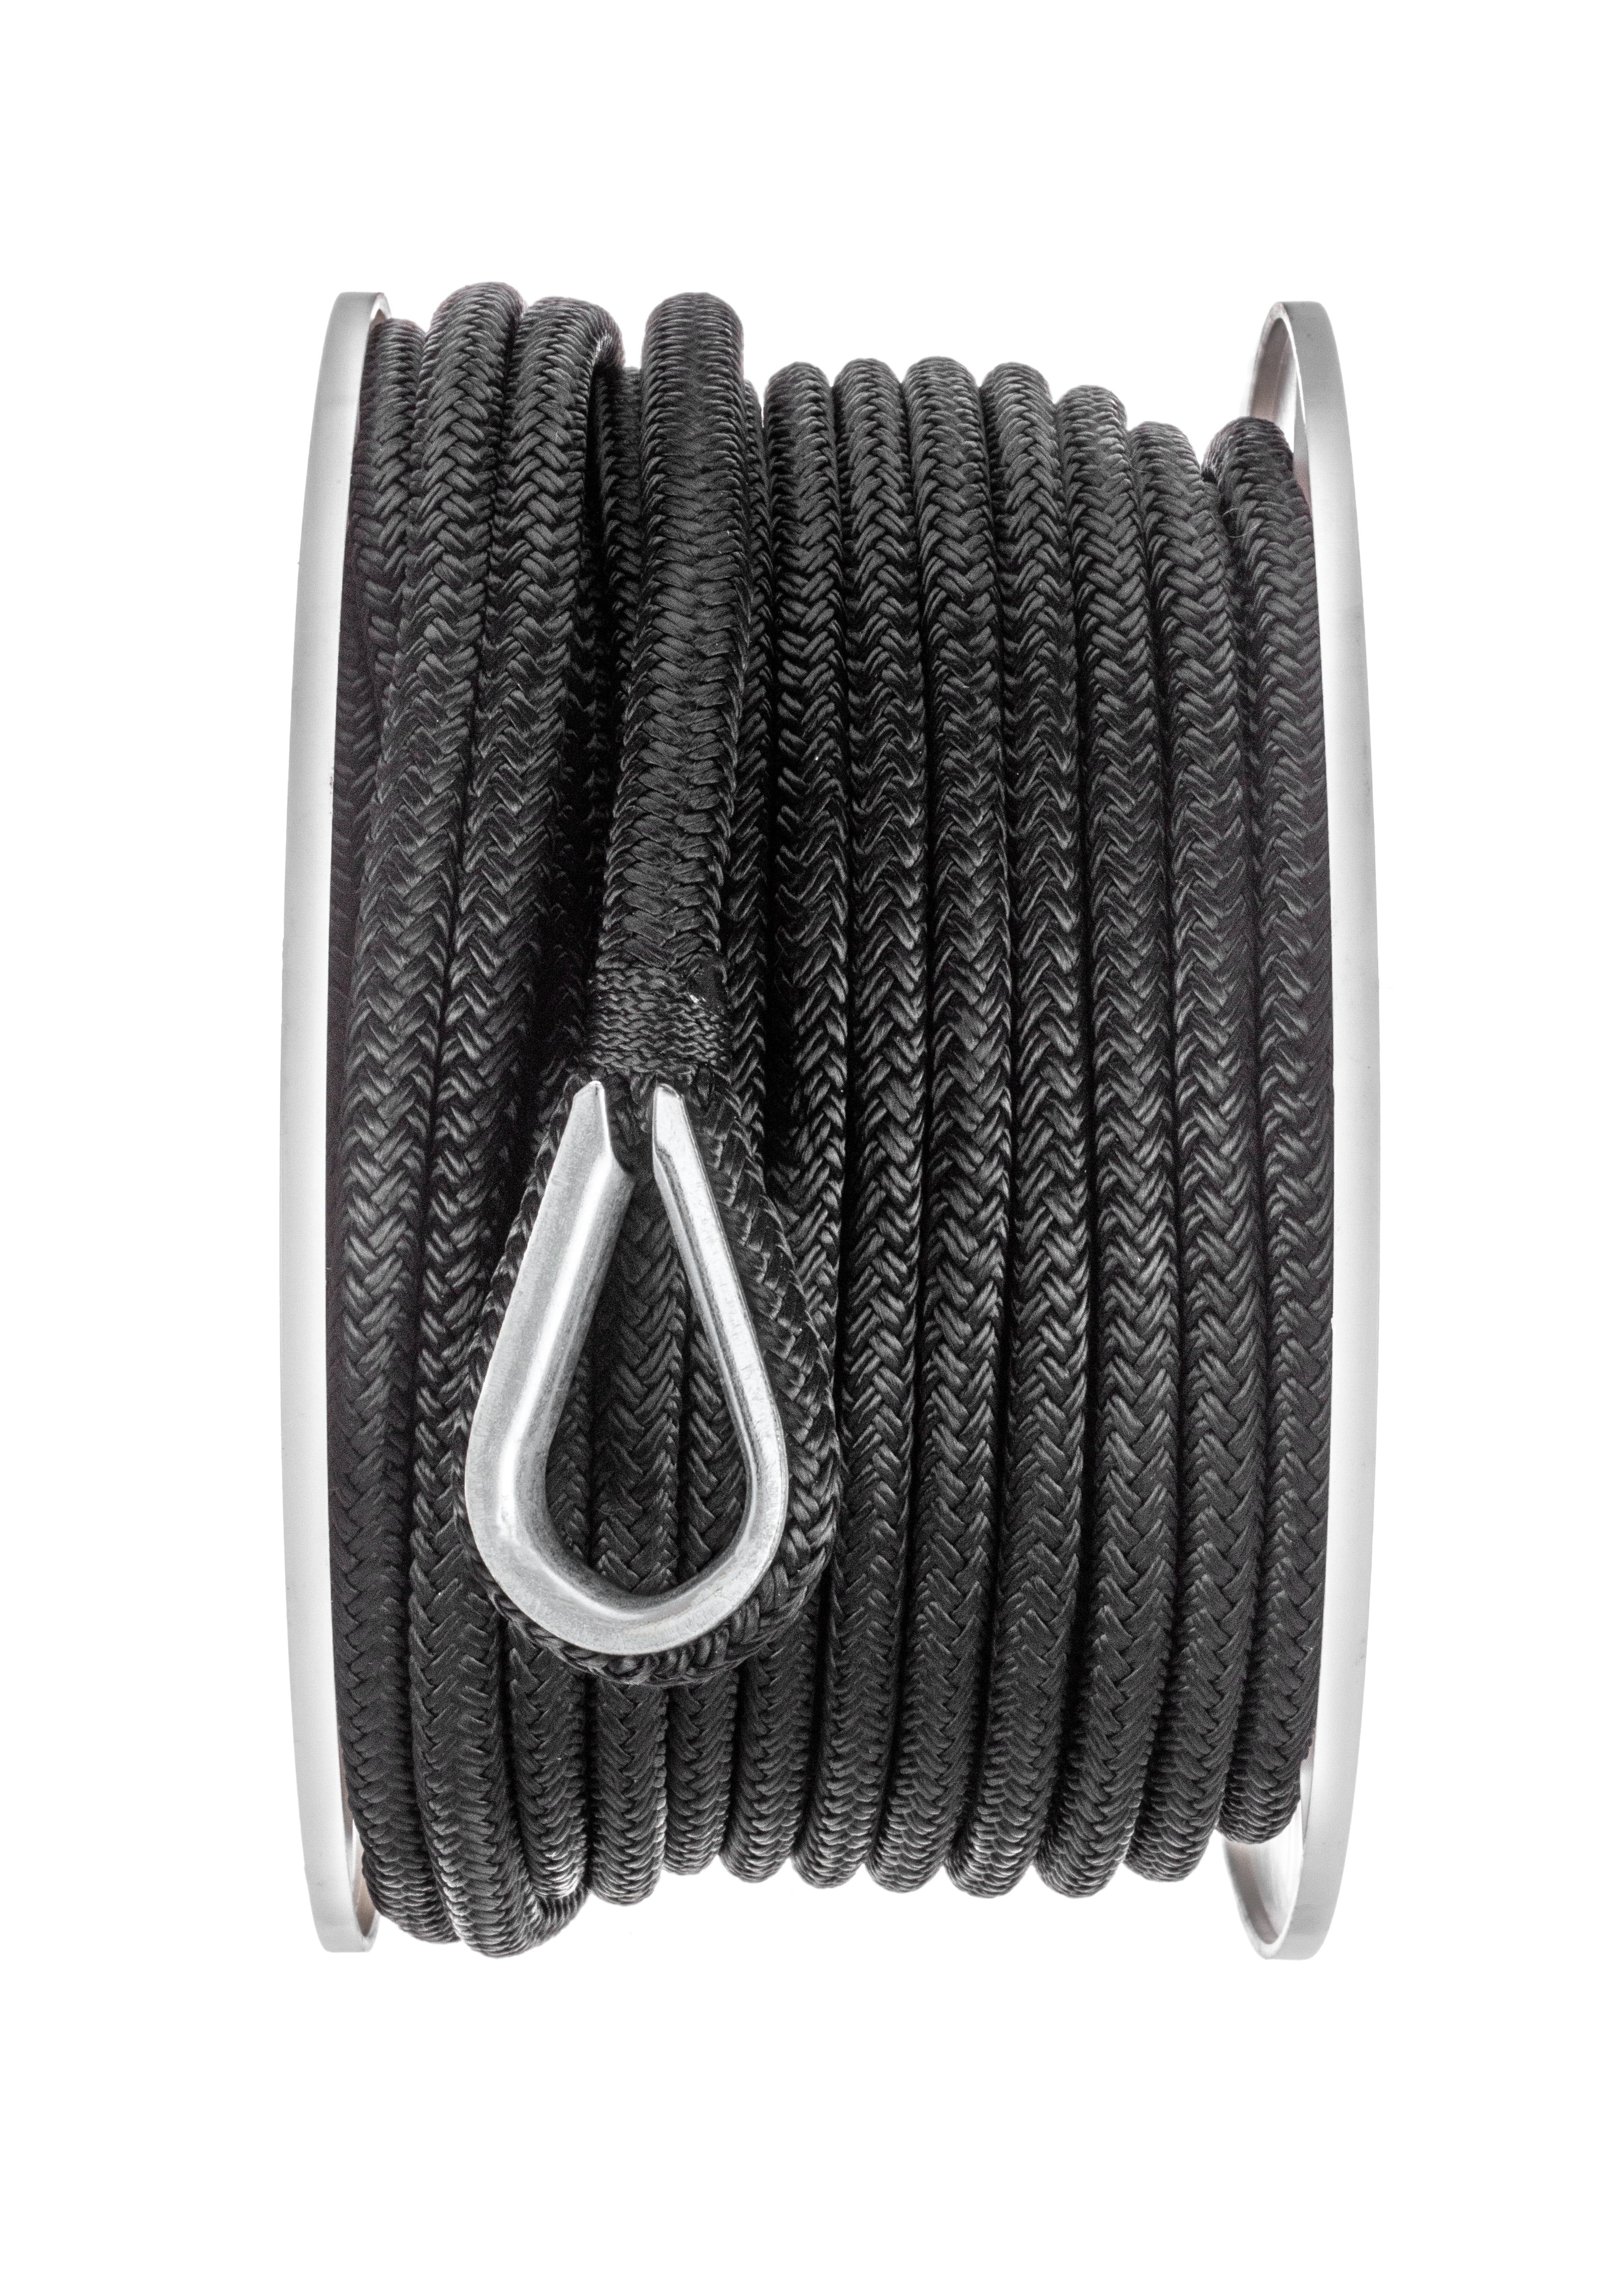 Docking Bang4buck 3/4 200 / 1/2 100 Twisted Braid Anchor Rope Heavy Duty Polypropylene Dock Lines for Boat/Sailboat Mooring Towing- with Thimble and 12592LB Breaking Strain